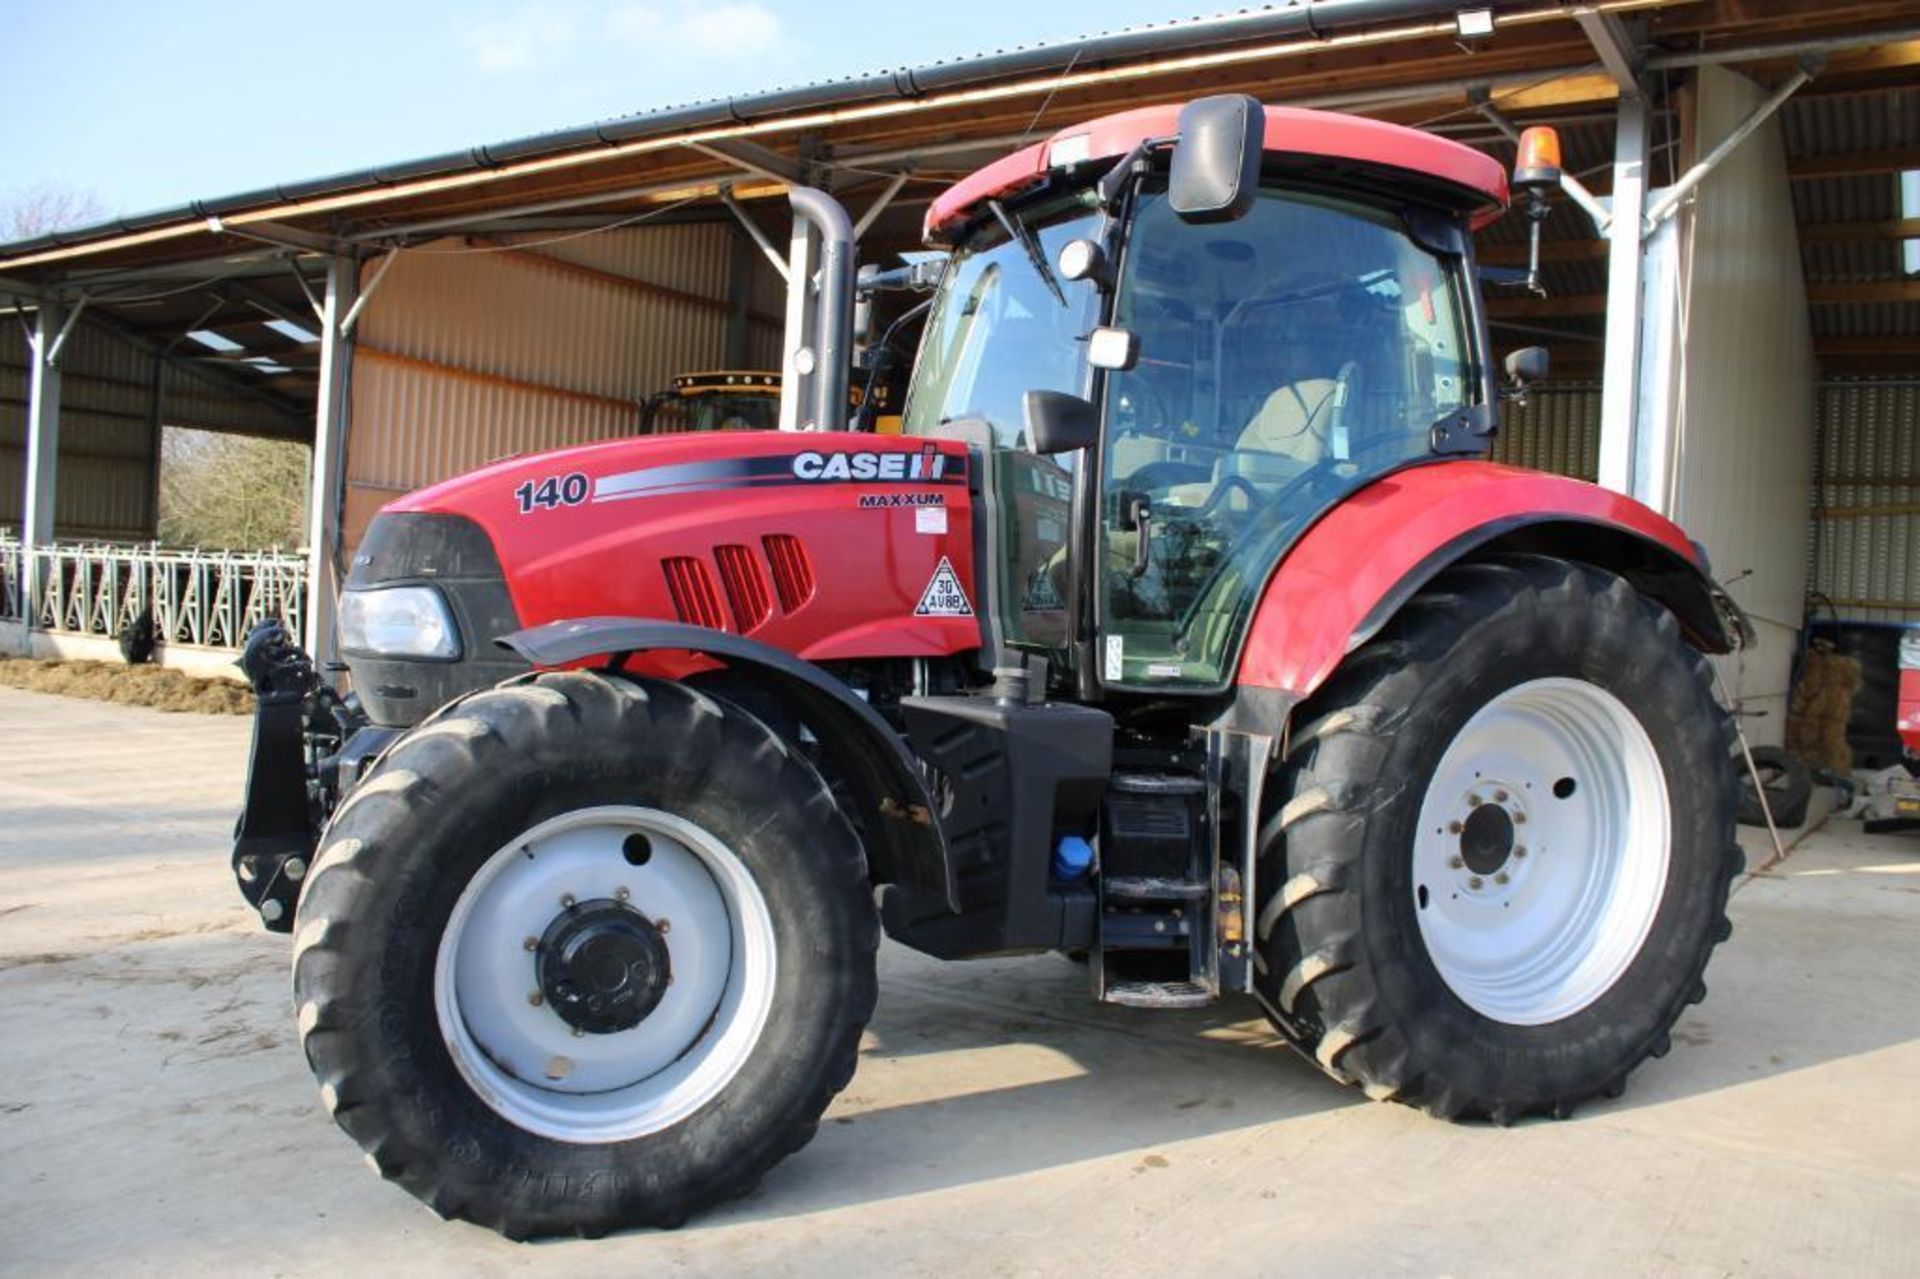 2013 Case Maxxum 140 50kph 4wd Powershift tractor with multicontroller joystick, front linkage, cab - Image 24 of 40